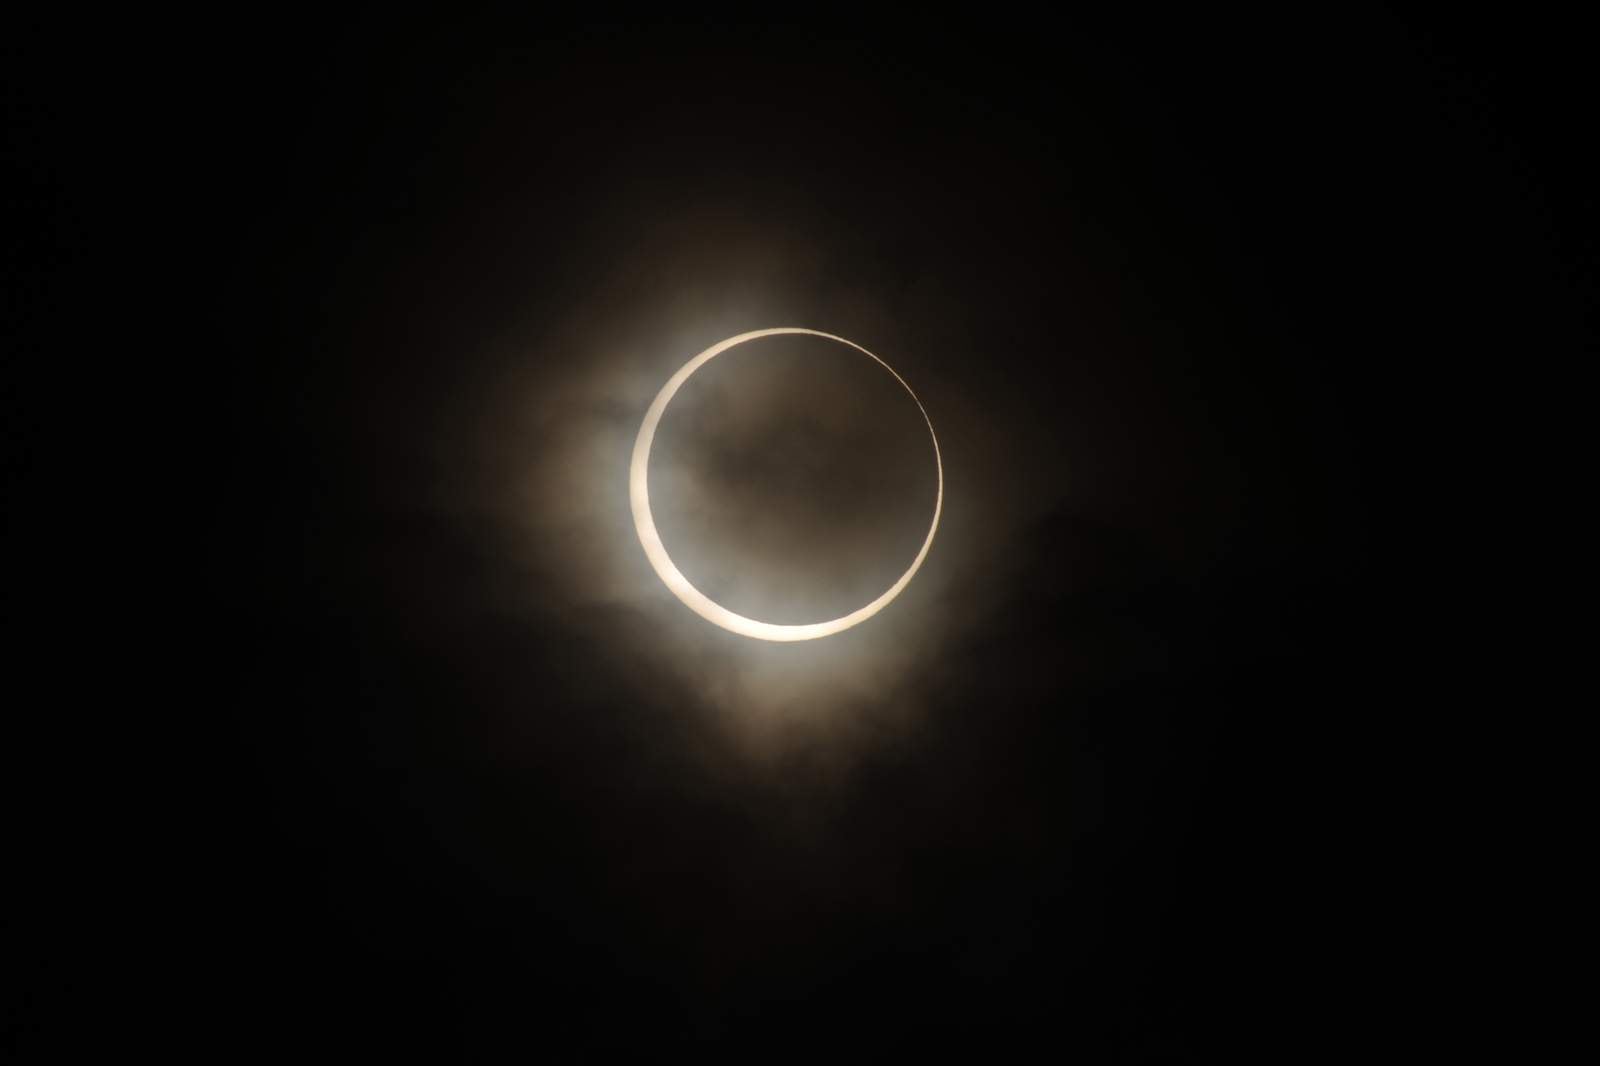 Solar eclipse 2020: How and when to watch the June annular eclipse